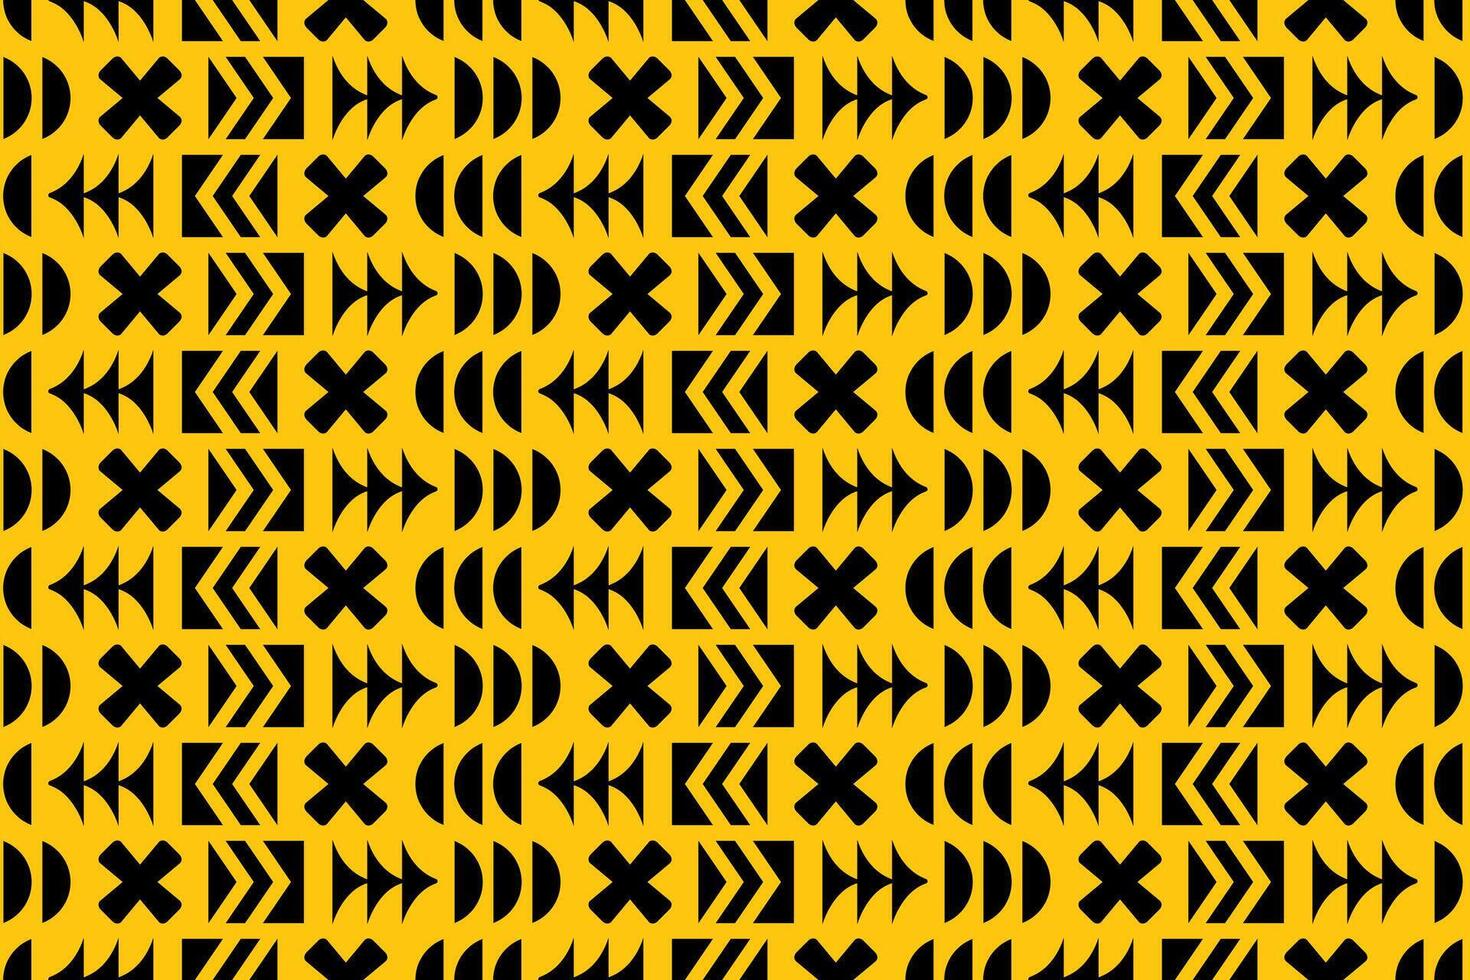 Abstract seamless geometric pattern in black and yellow colors. Simple minimalistic modern repeating pattern with flat geometric elements. vector